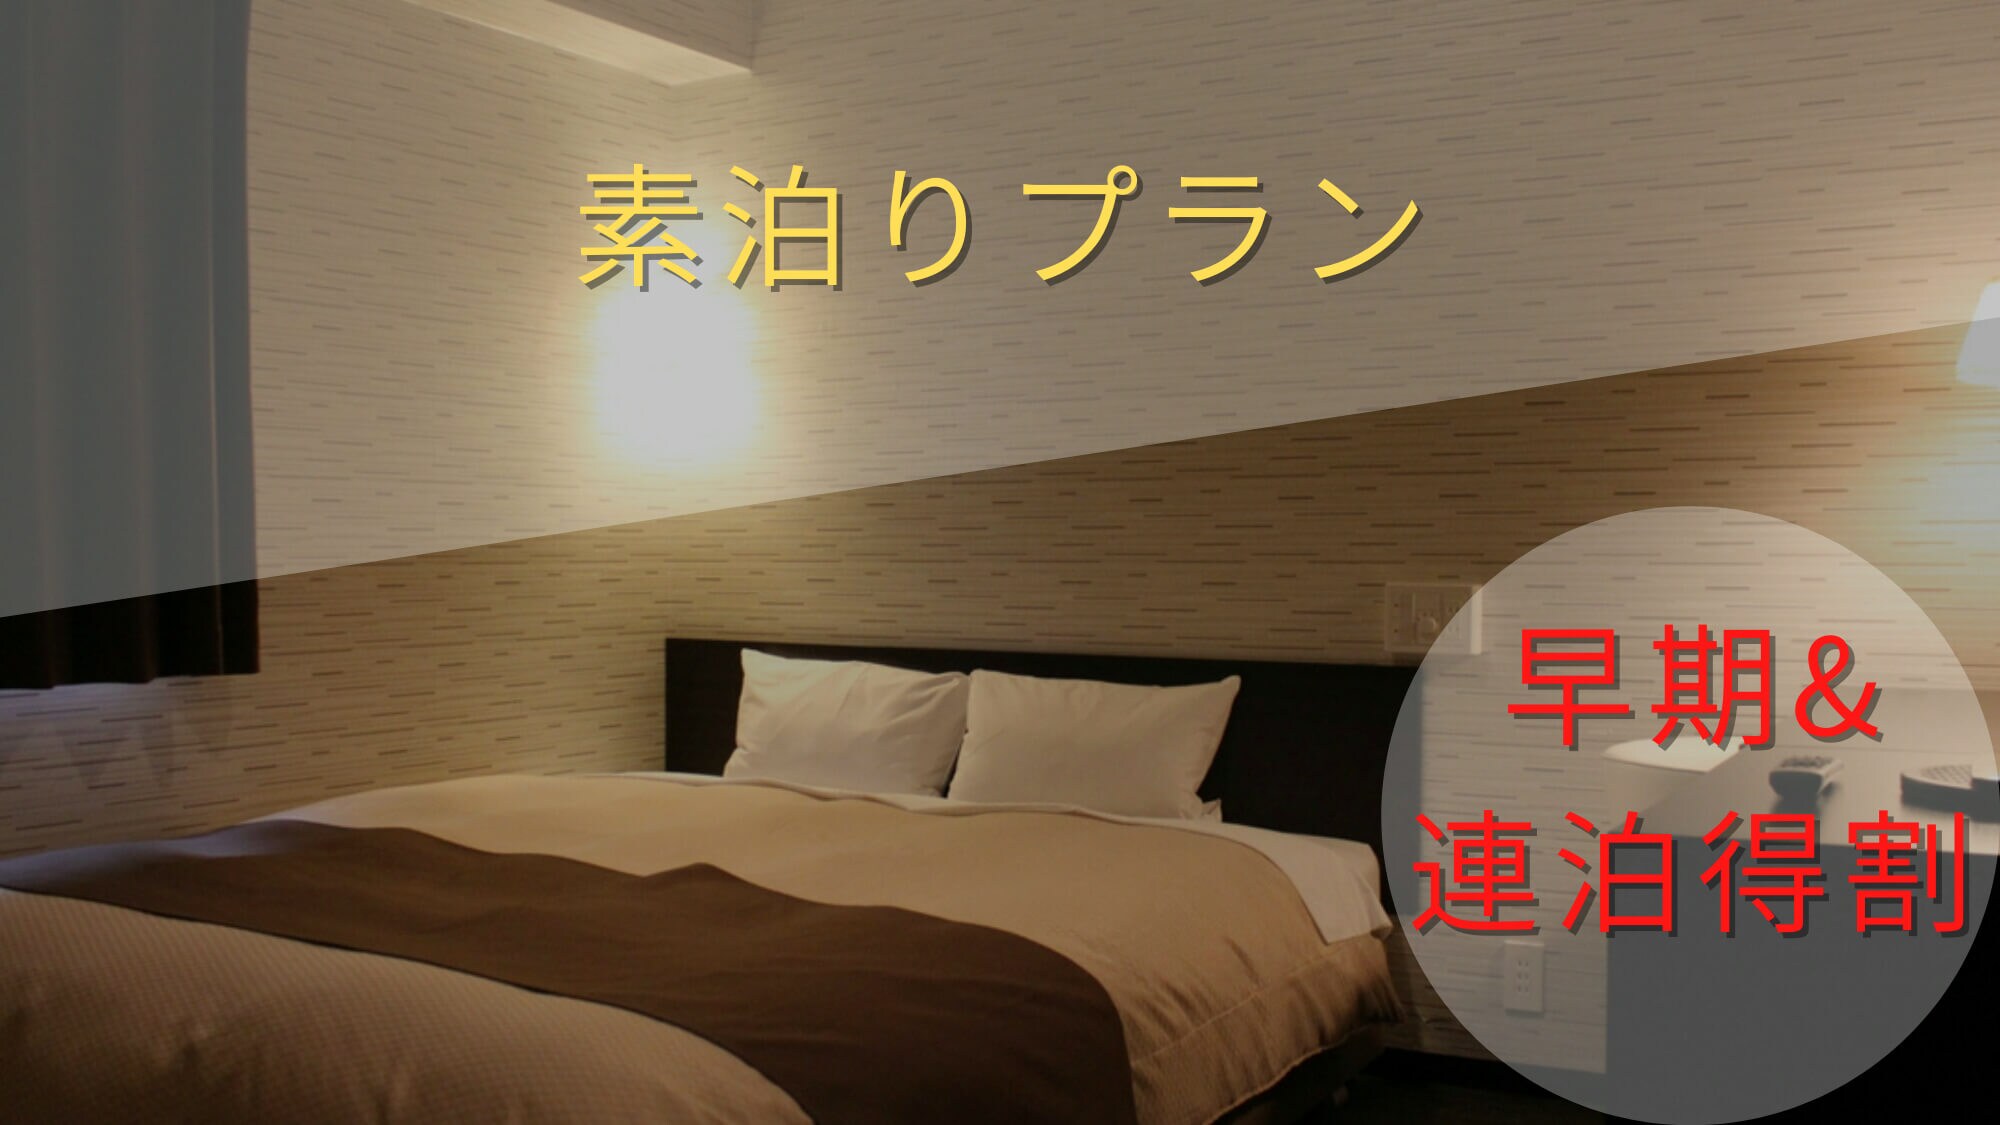 [Early discount] 7 days advance reservation & [Consecutive night discount] Reservation for 2 consecutive nights or more [Cost performance pursuit] Room without meals / accommodation plan